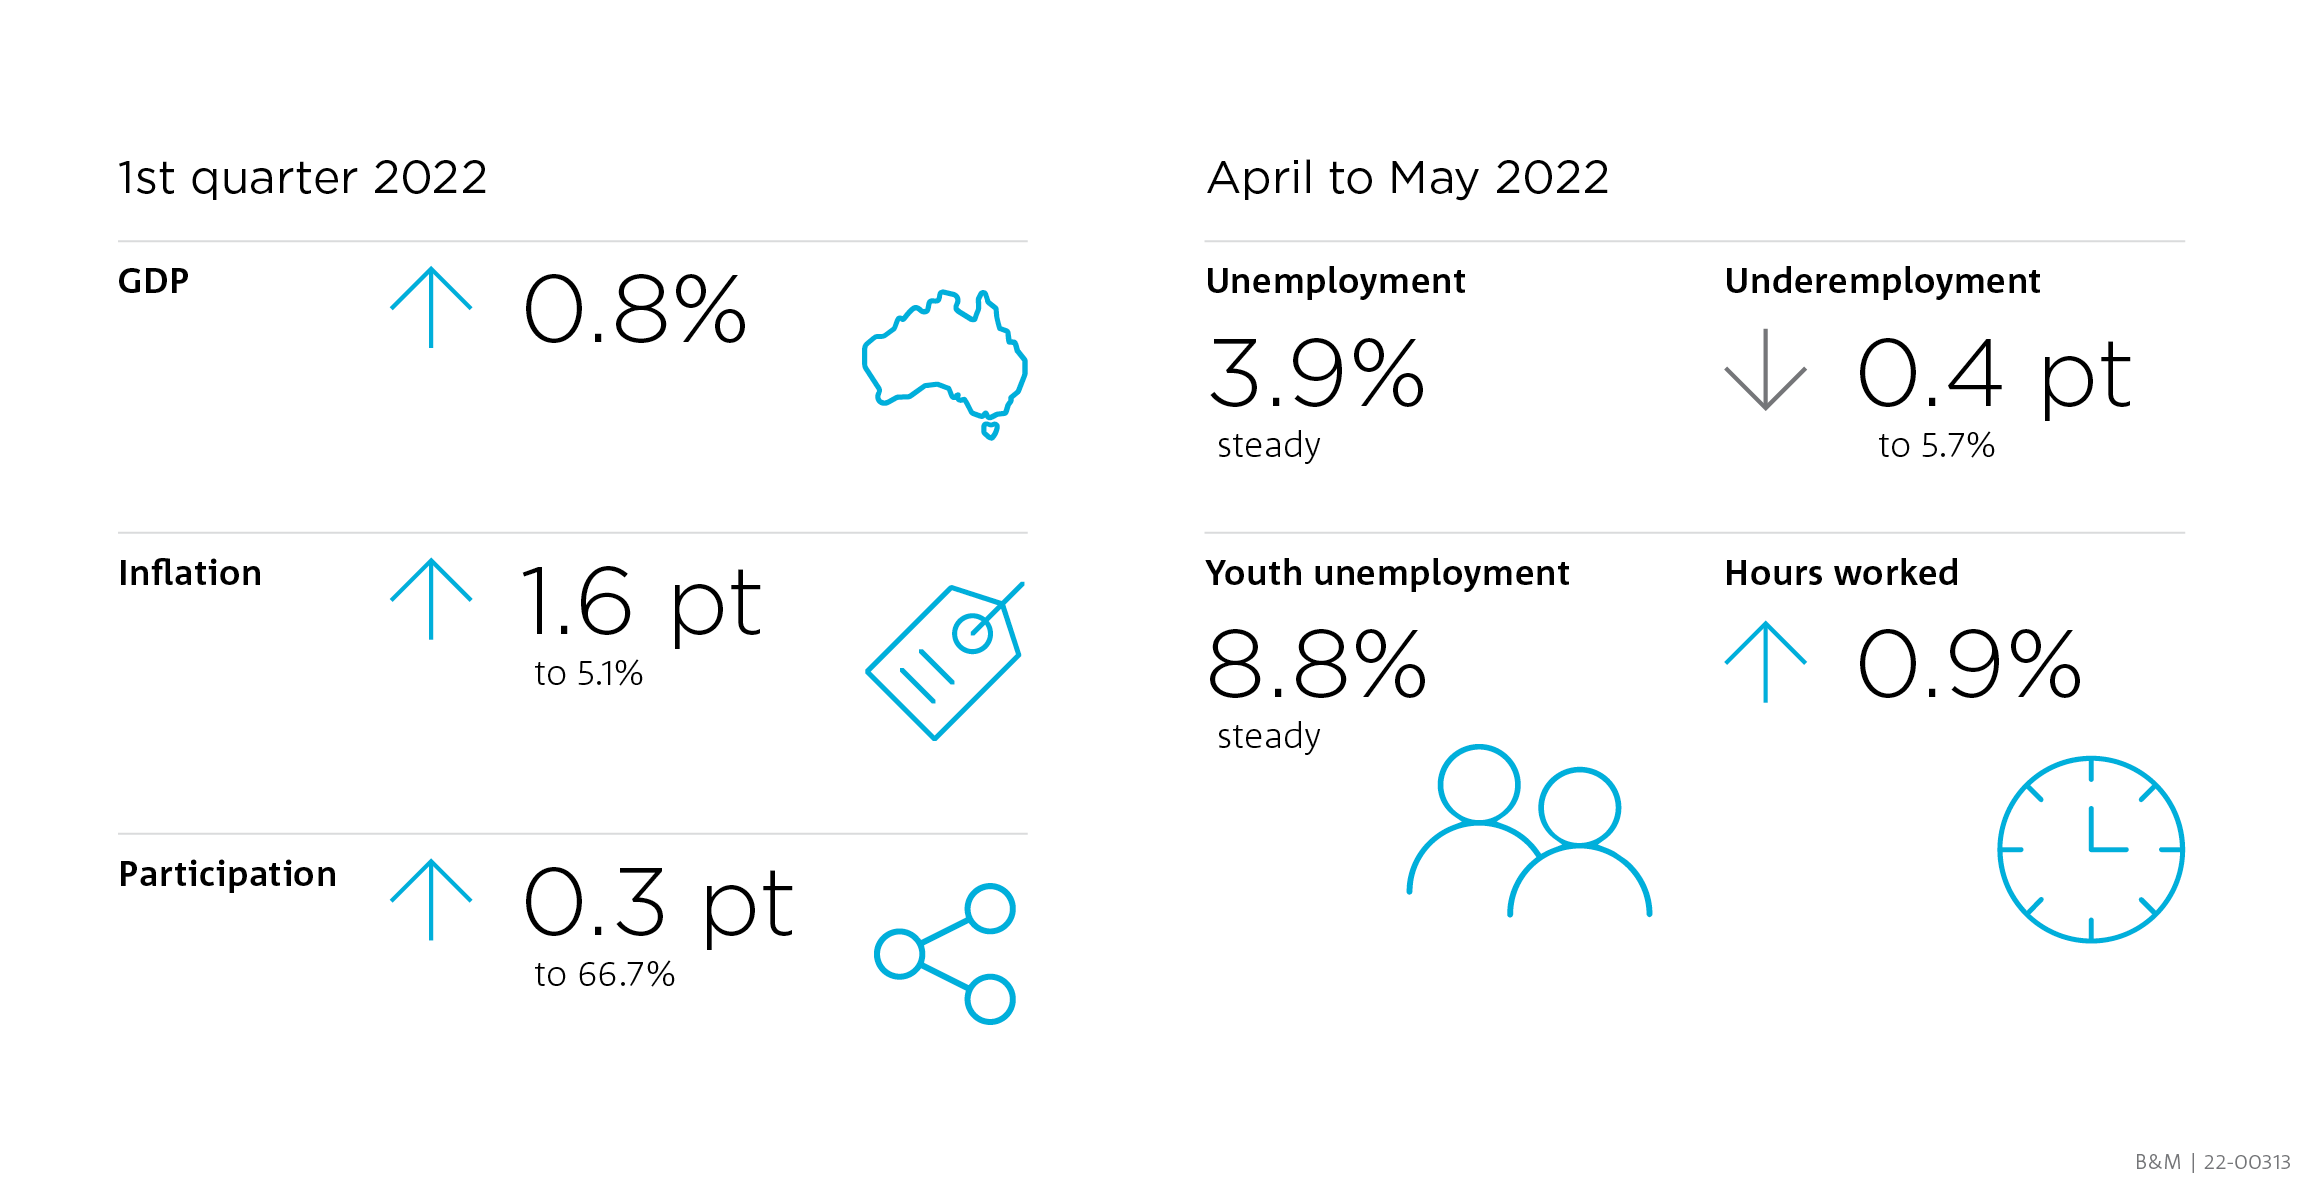 Infographic summarising the GDP, inflation and participation increase for the first quarter of 2022 as well as the unemployment, underemployment, youth employment and hours worked between April to May 2022 